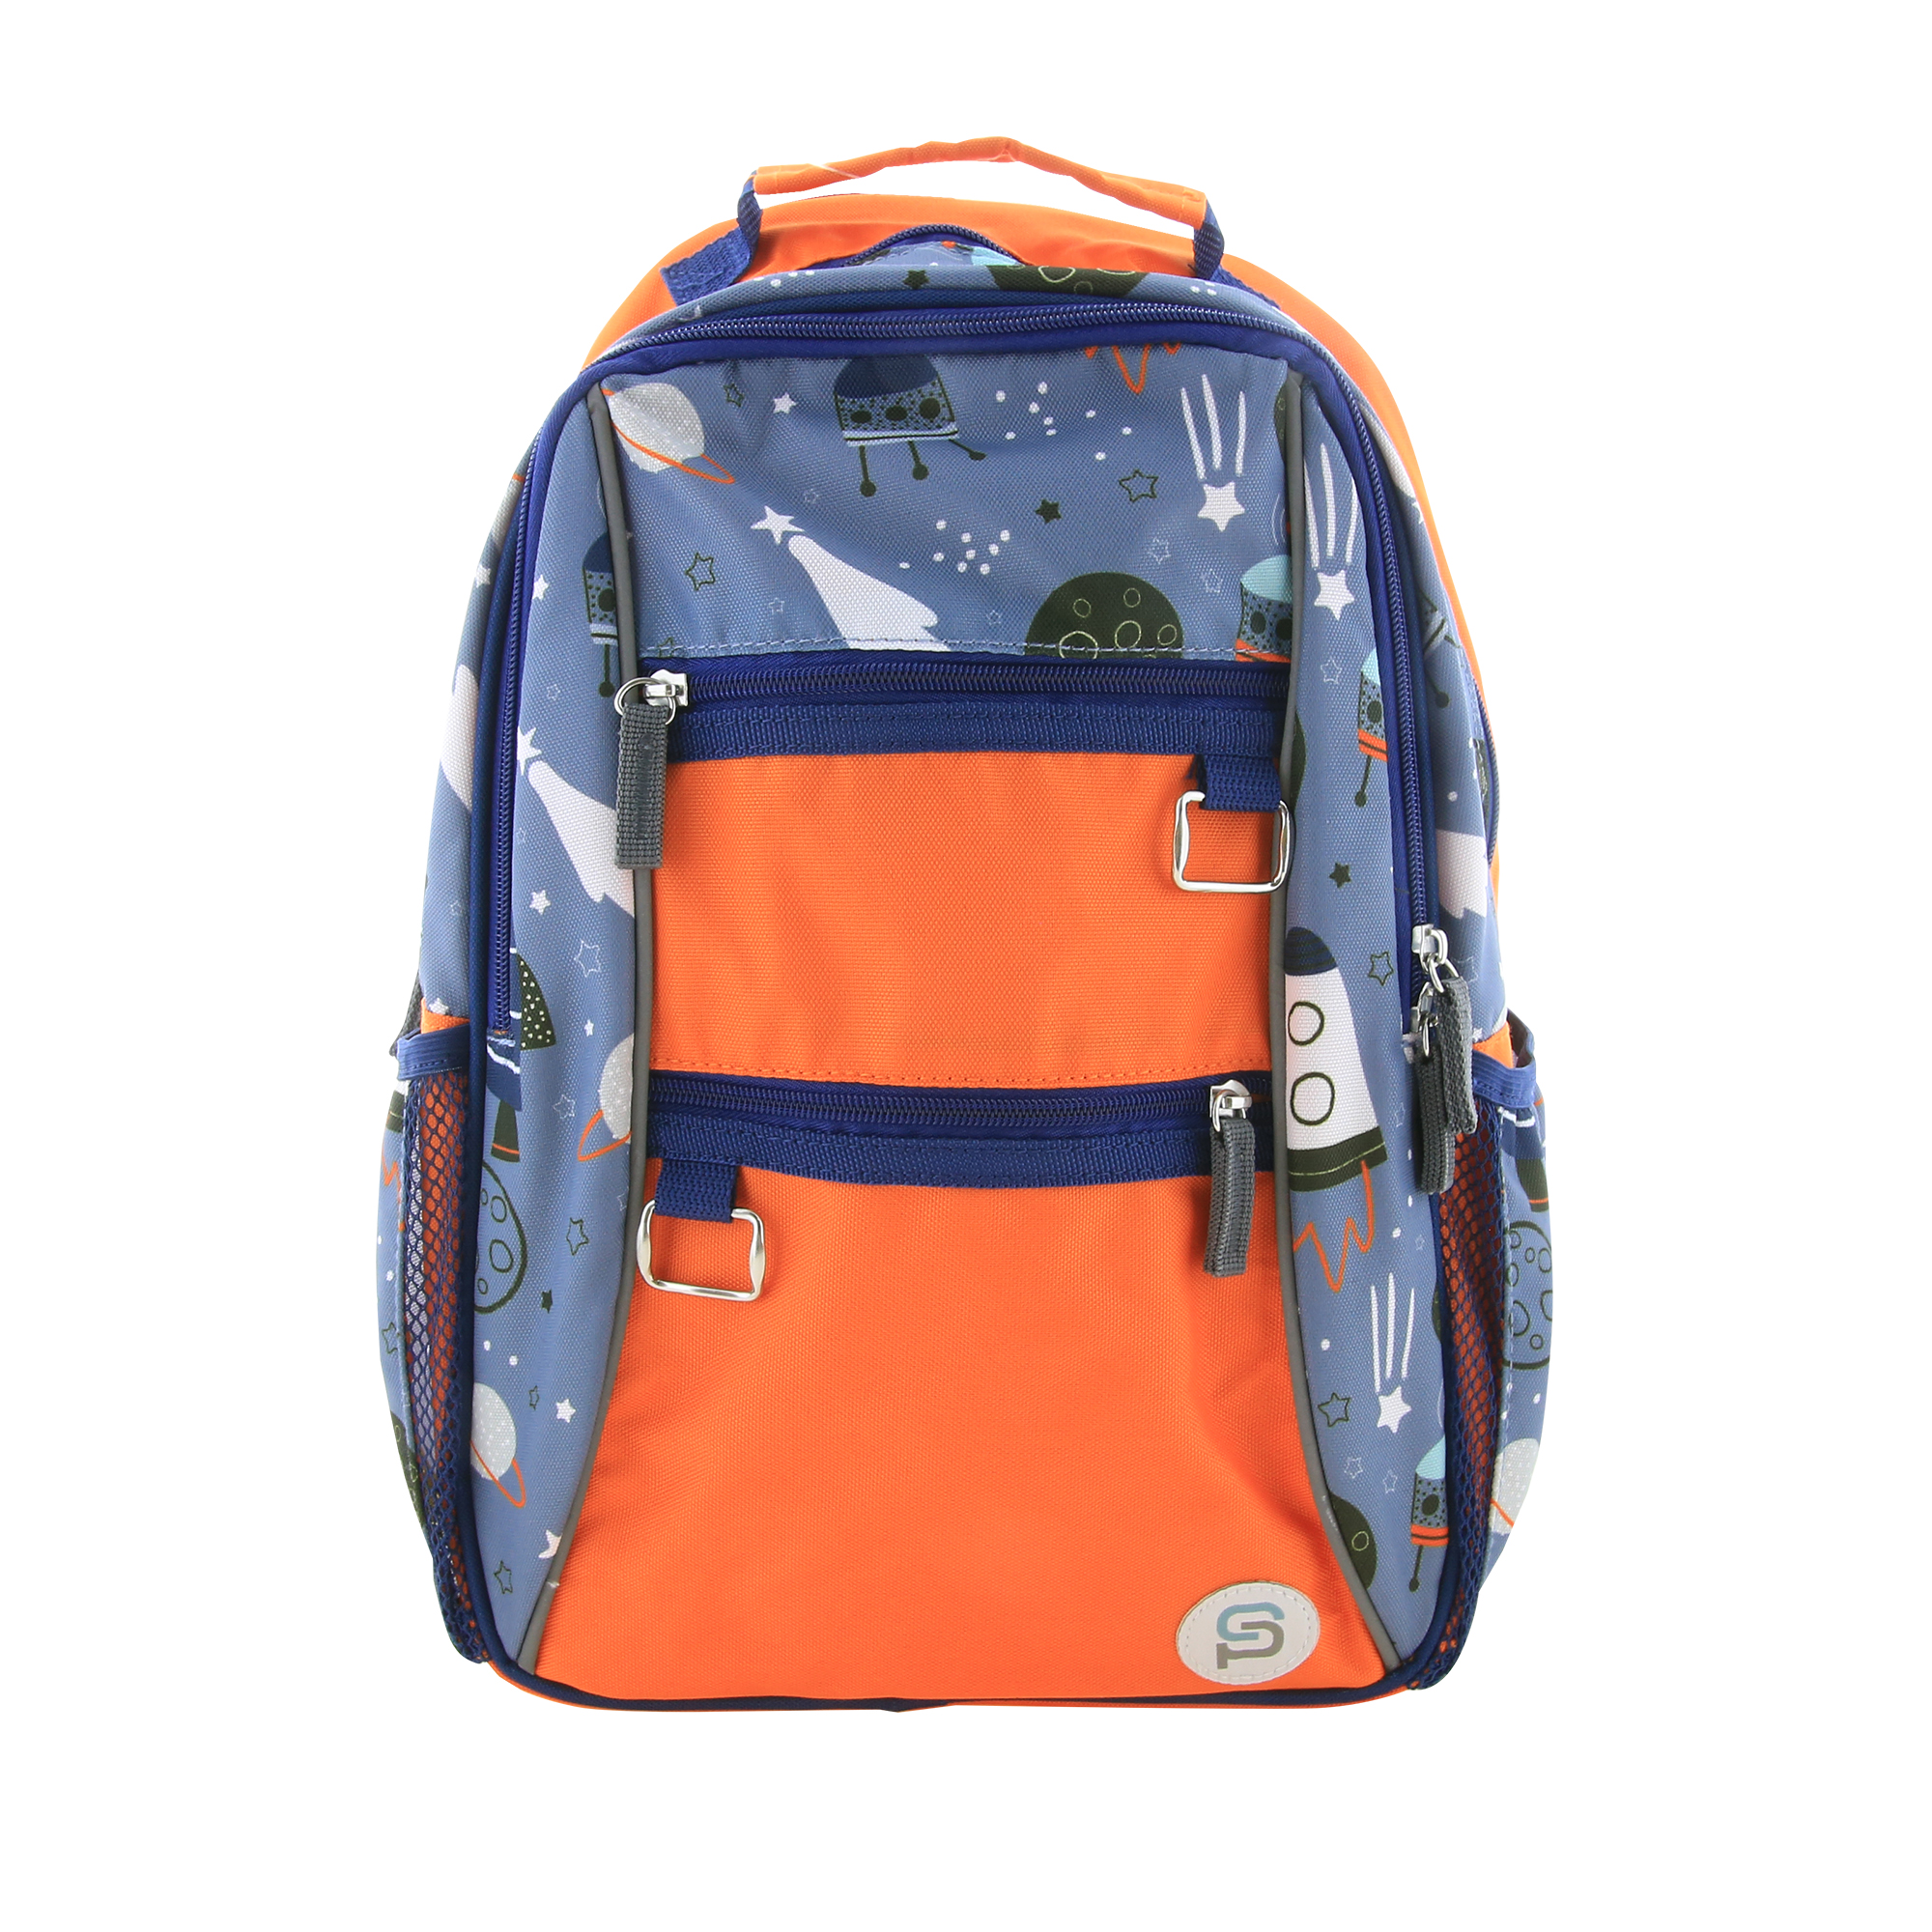 Sydney Paige x BAZIC VALENCIA 16″ Space Backpack